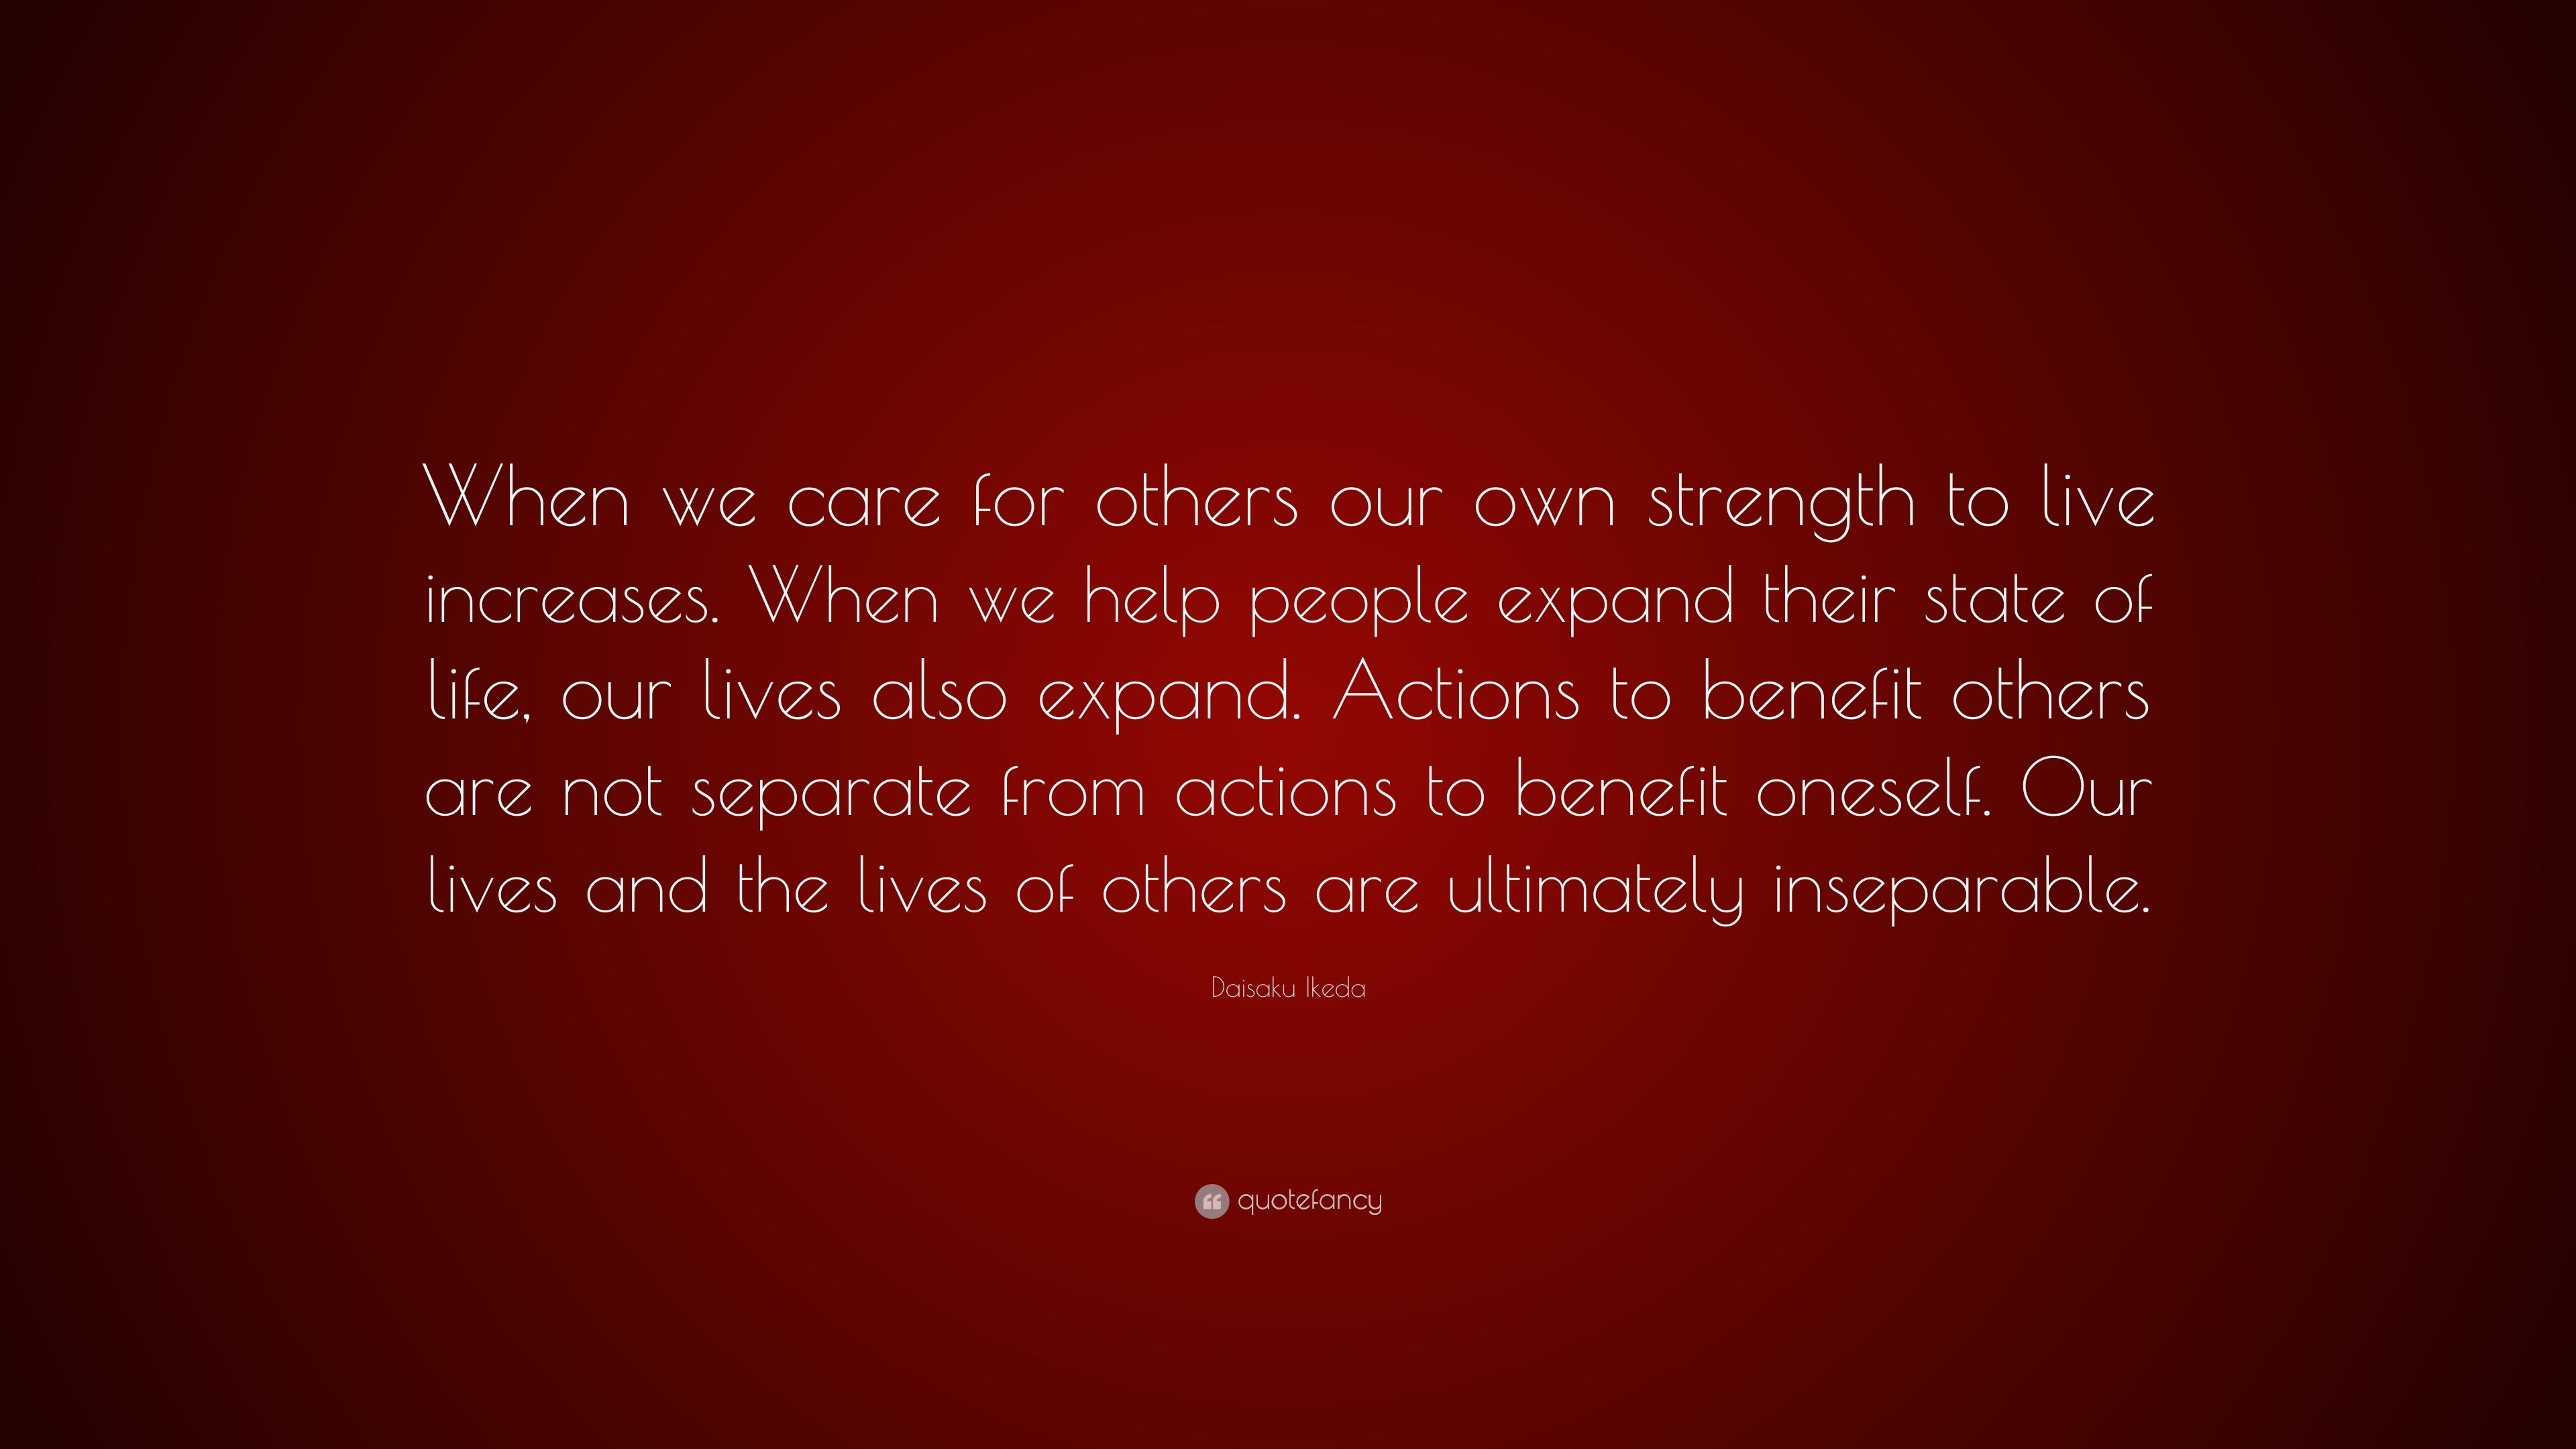 Daisaku Ikeda Quote: “When We Care For Others Our Own Strength To Live Increases. When We Help People Expand Their State Of Life, Our Lives Al...”